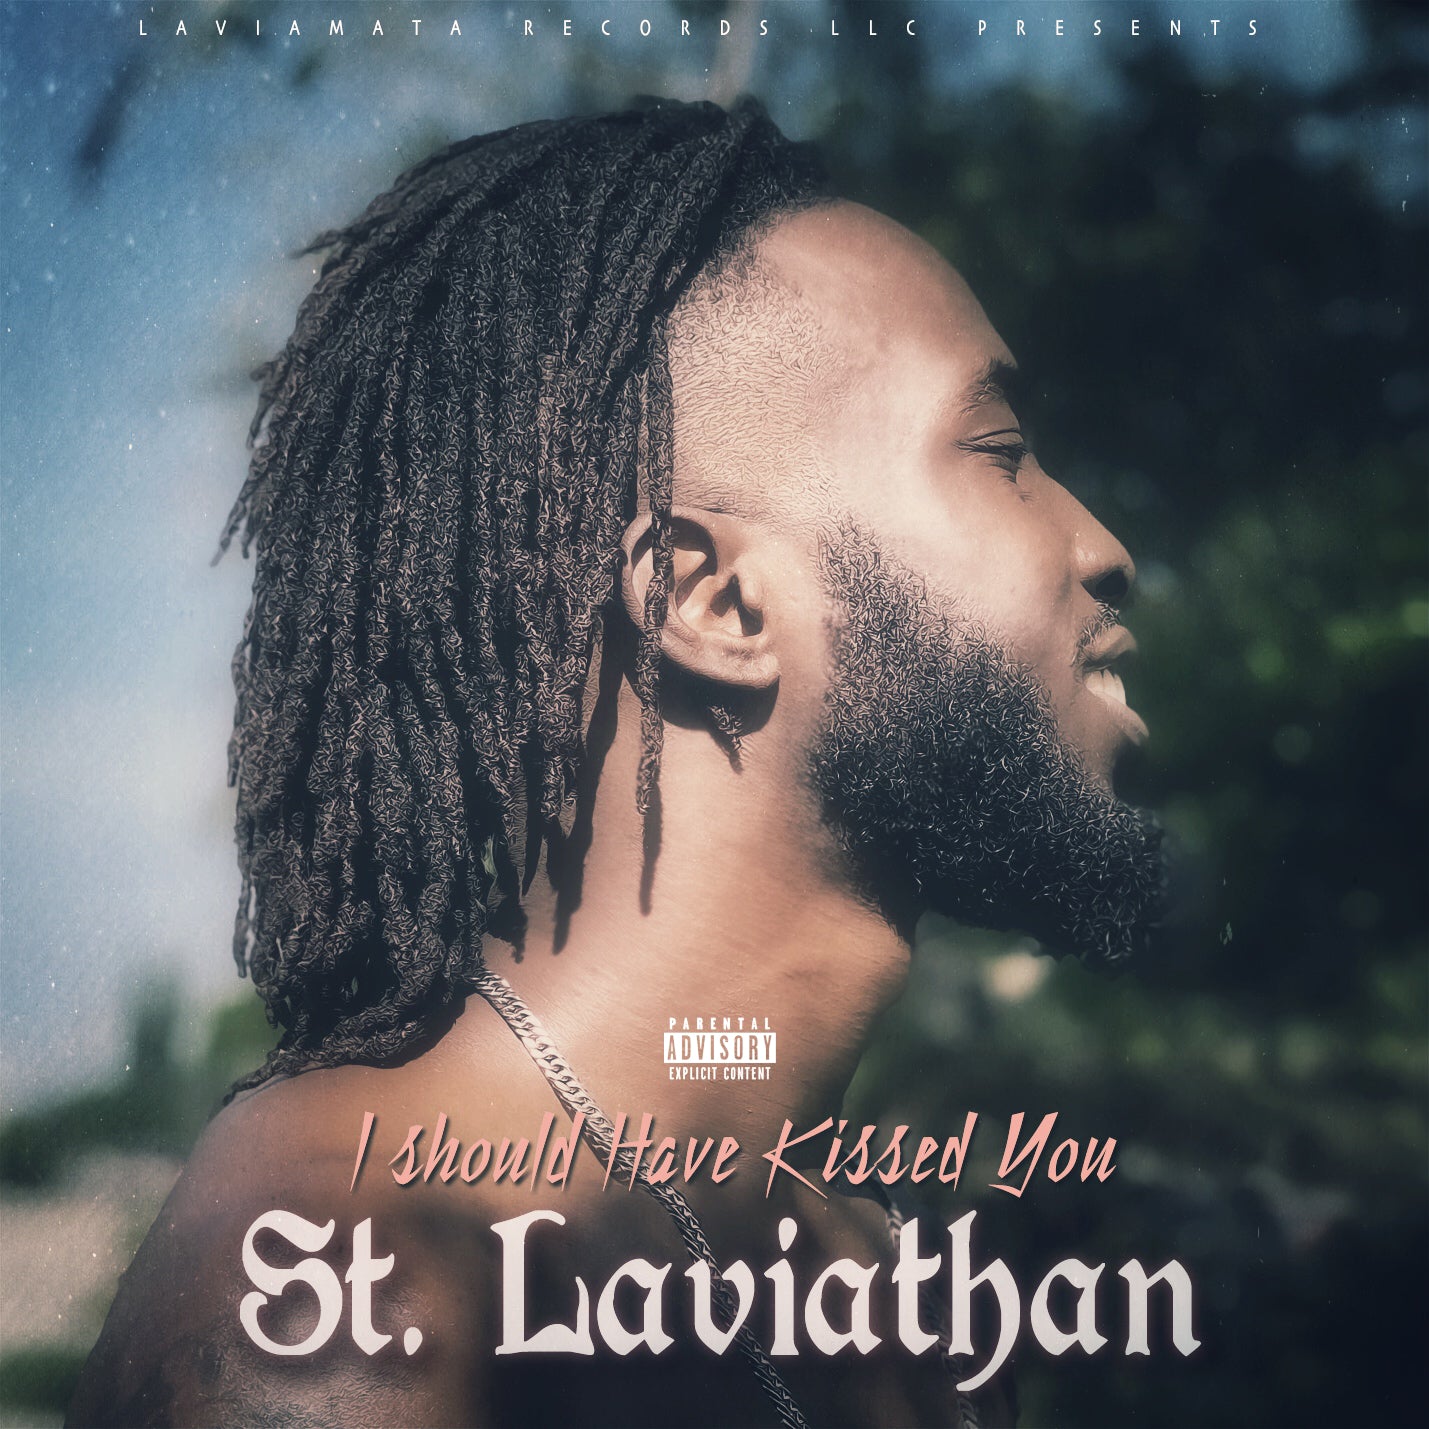 St. Laviathan – ‘I Should Have Kissed You’